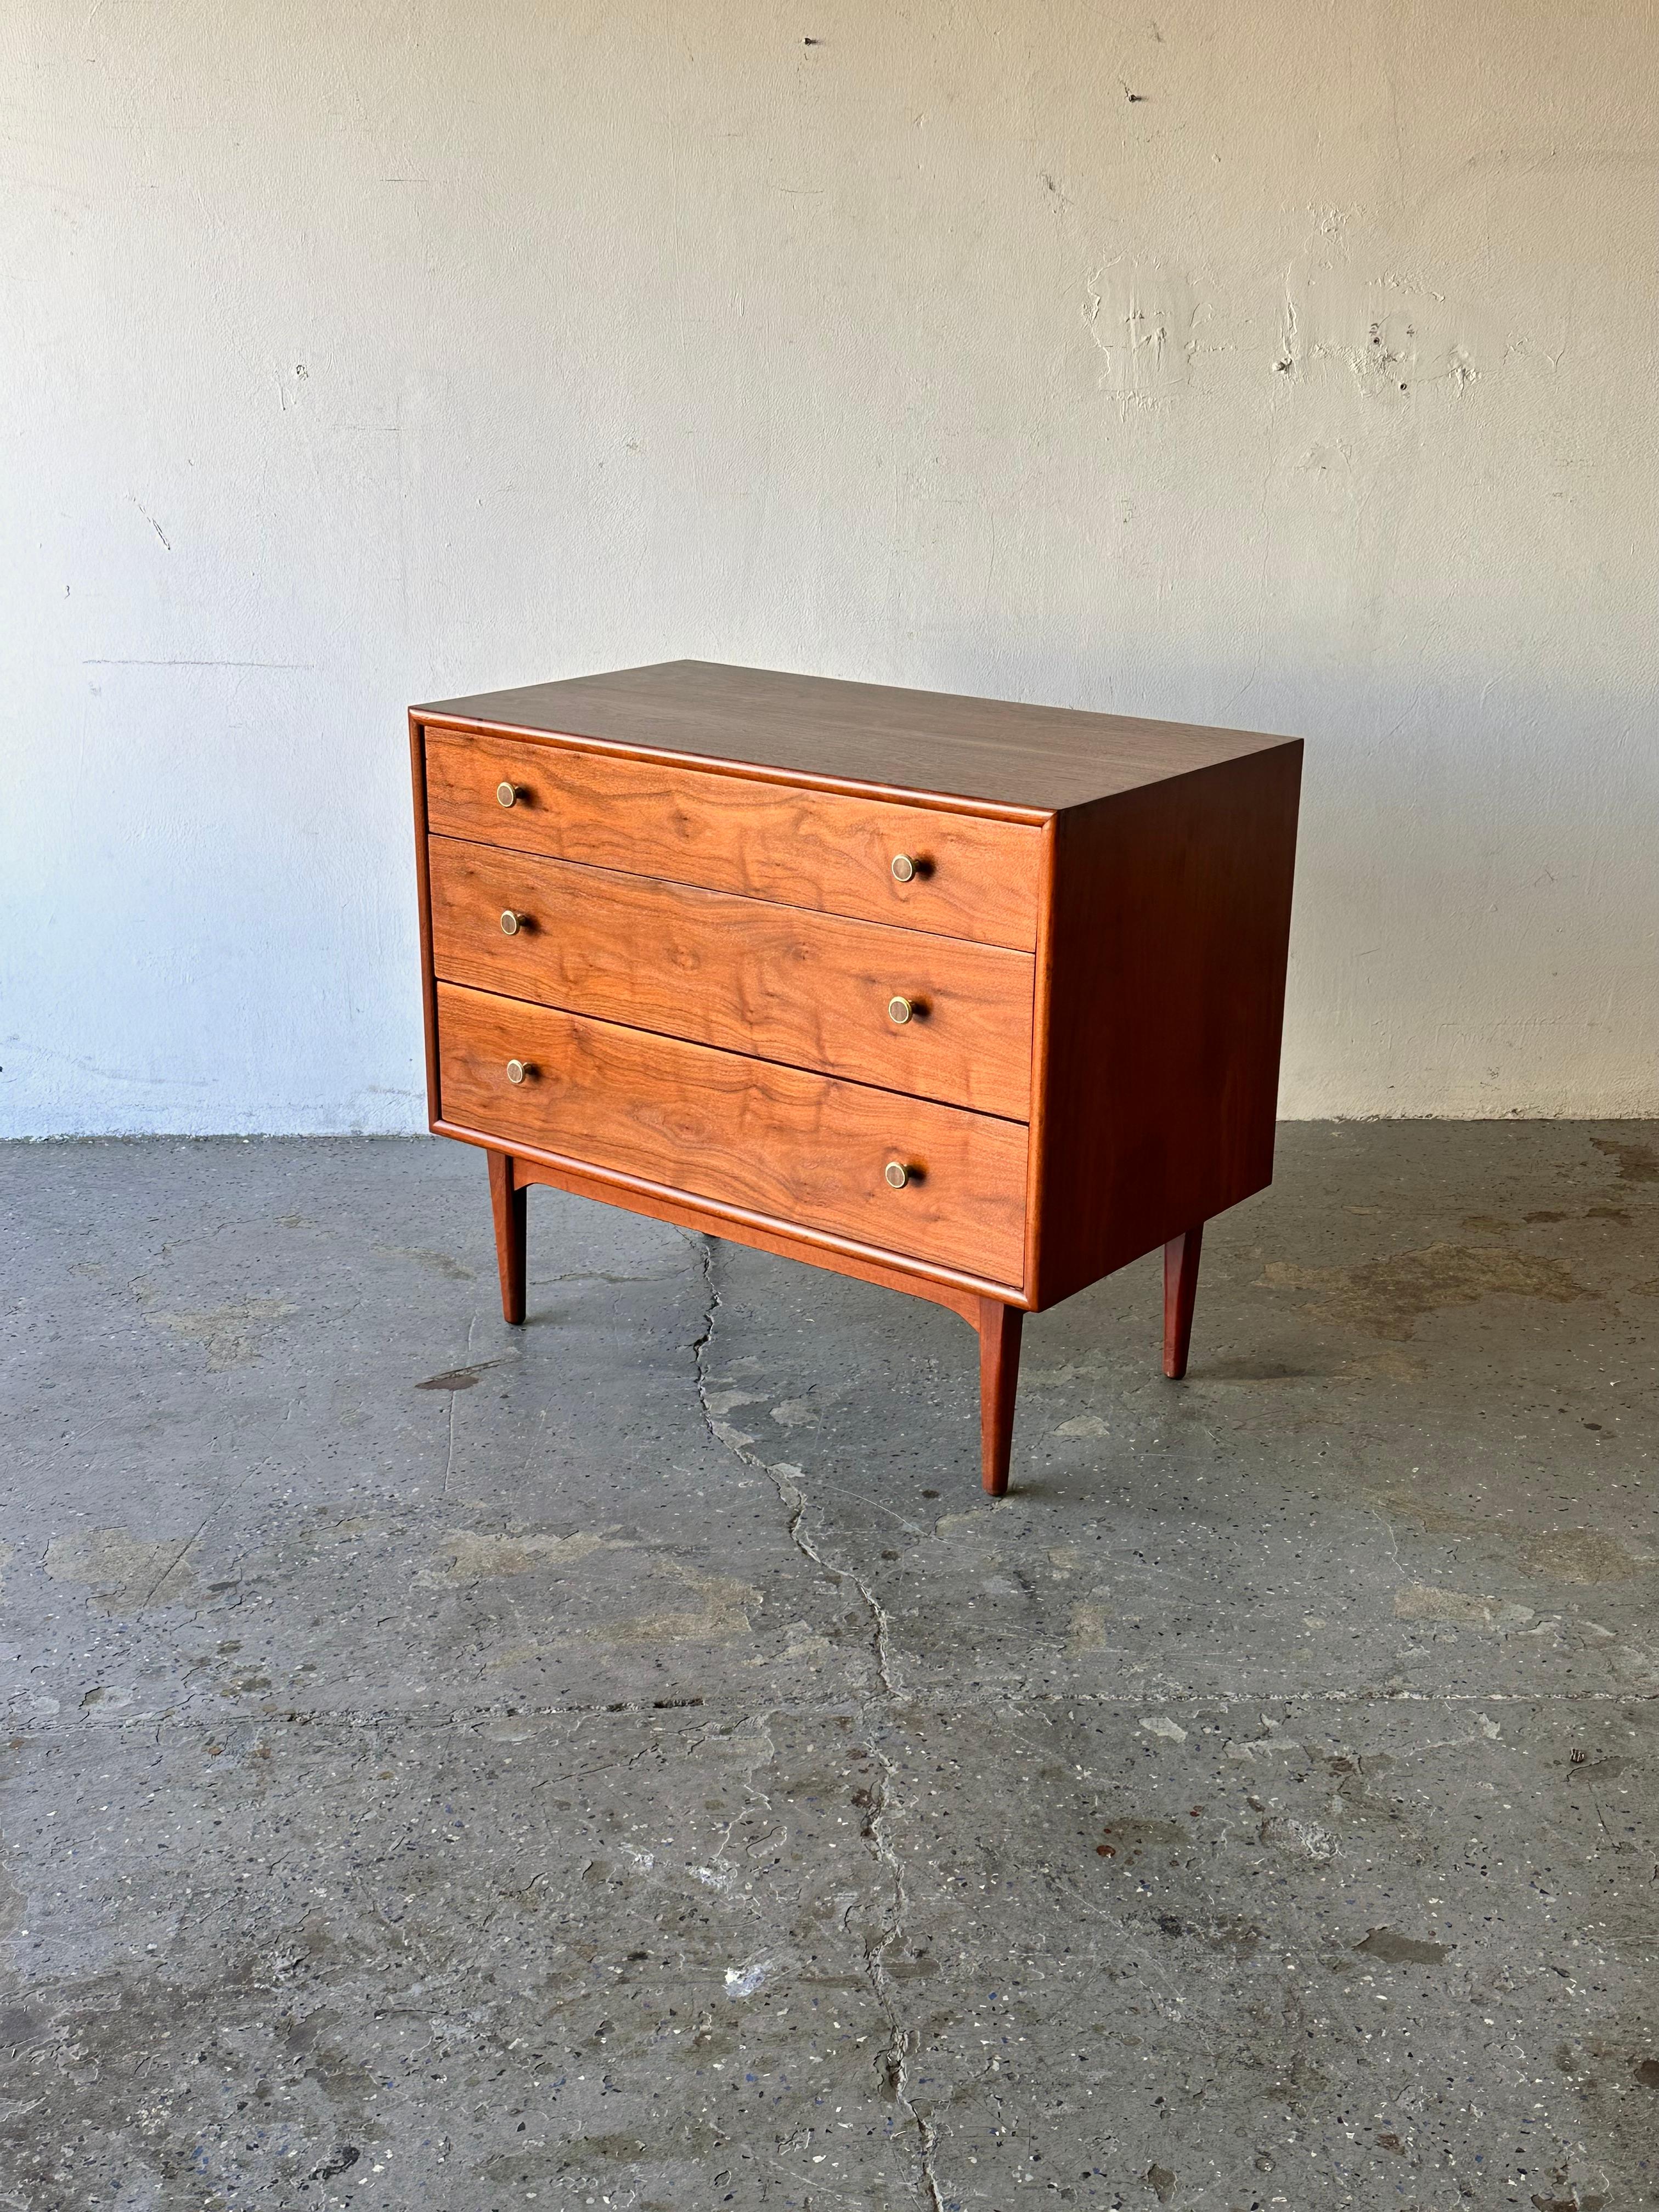 Fabulous Mid-Century Modern dresser bachelor chest designed by Kipp Stewart and Stewart MacDougall for Drexel’s Declaration Collection, circa 1960s. Featuring   beautifully grained walnut. Three dovetailed drawers, each is adorned with original